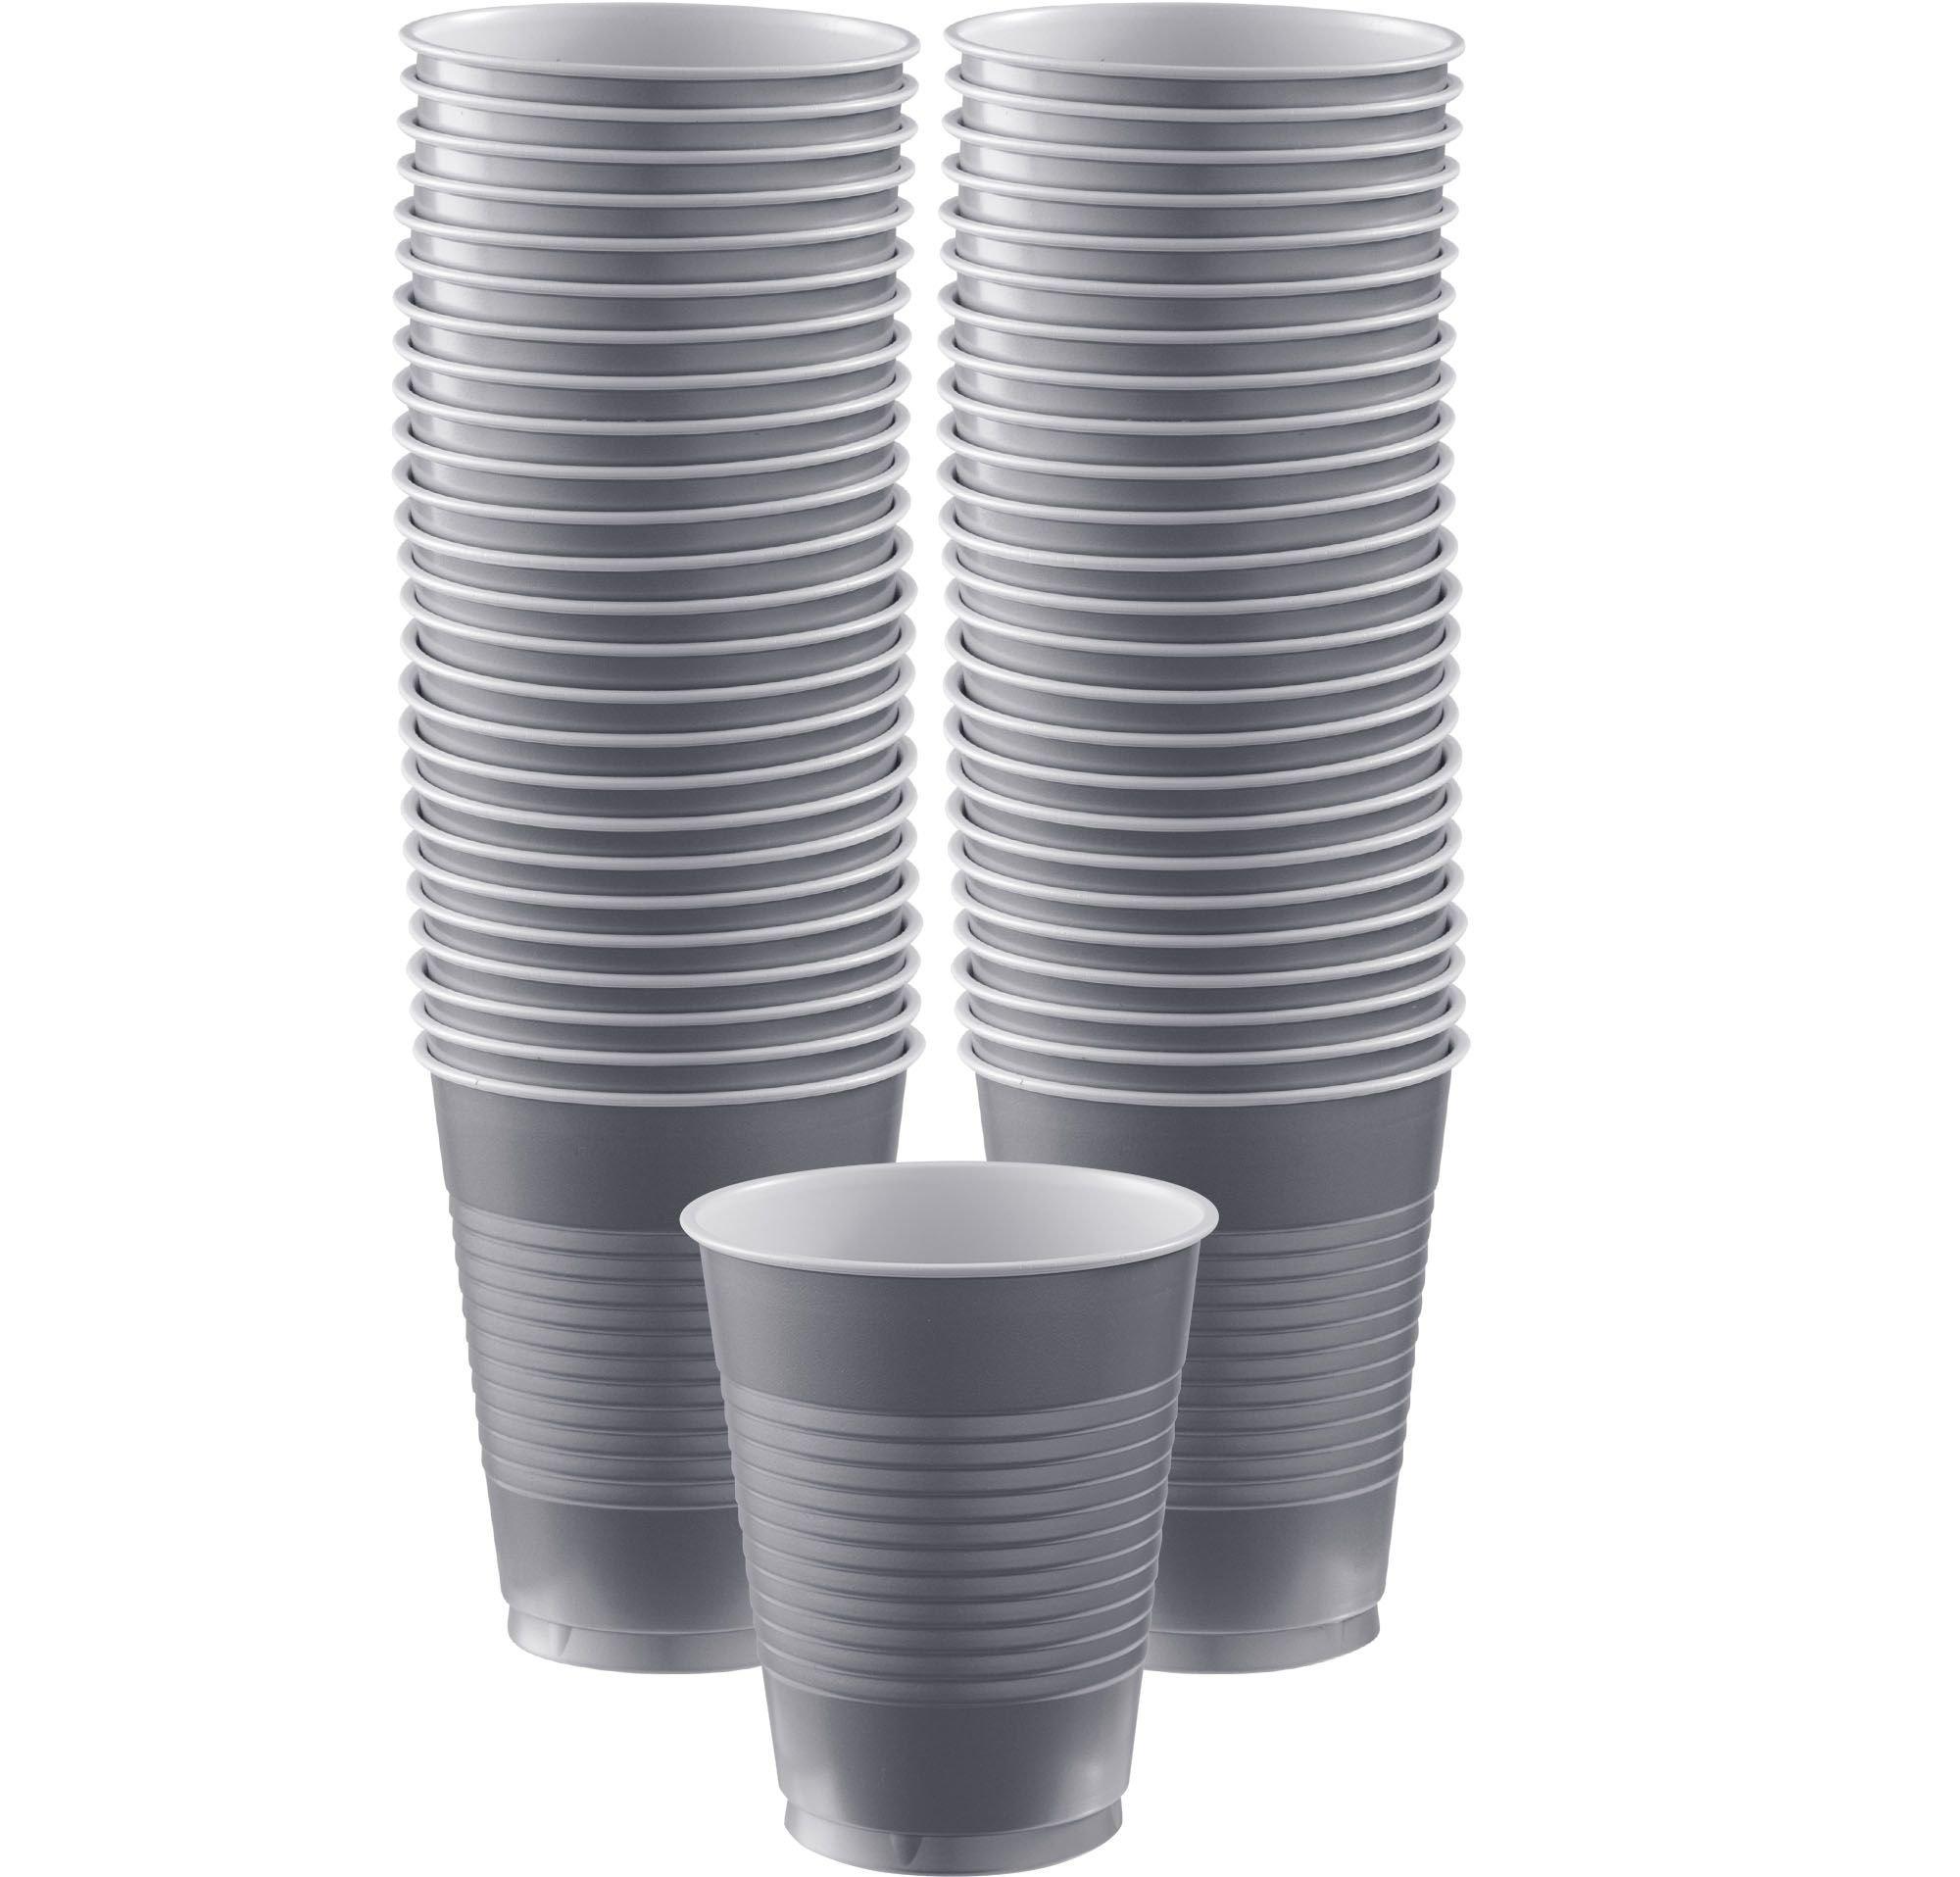 16 oz Solid Plastic Cups White,Pack of 20,3 packs